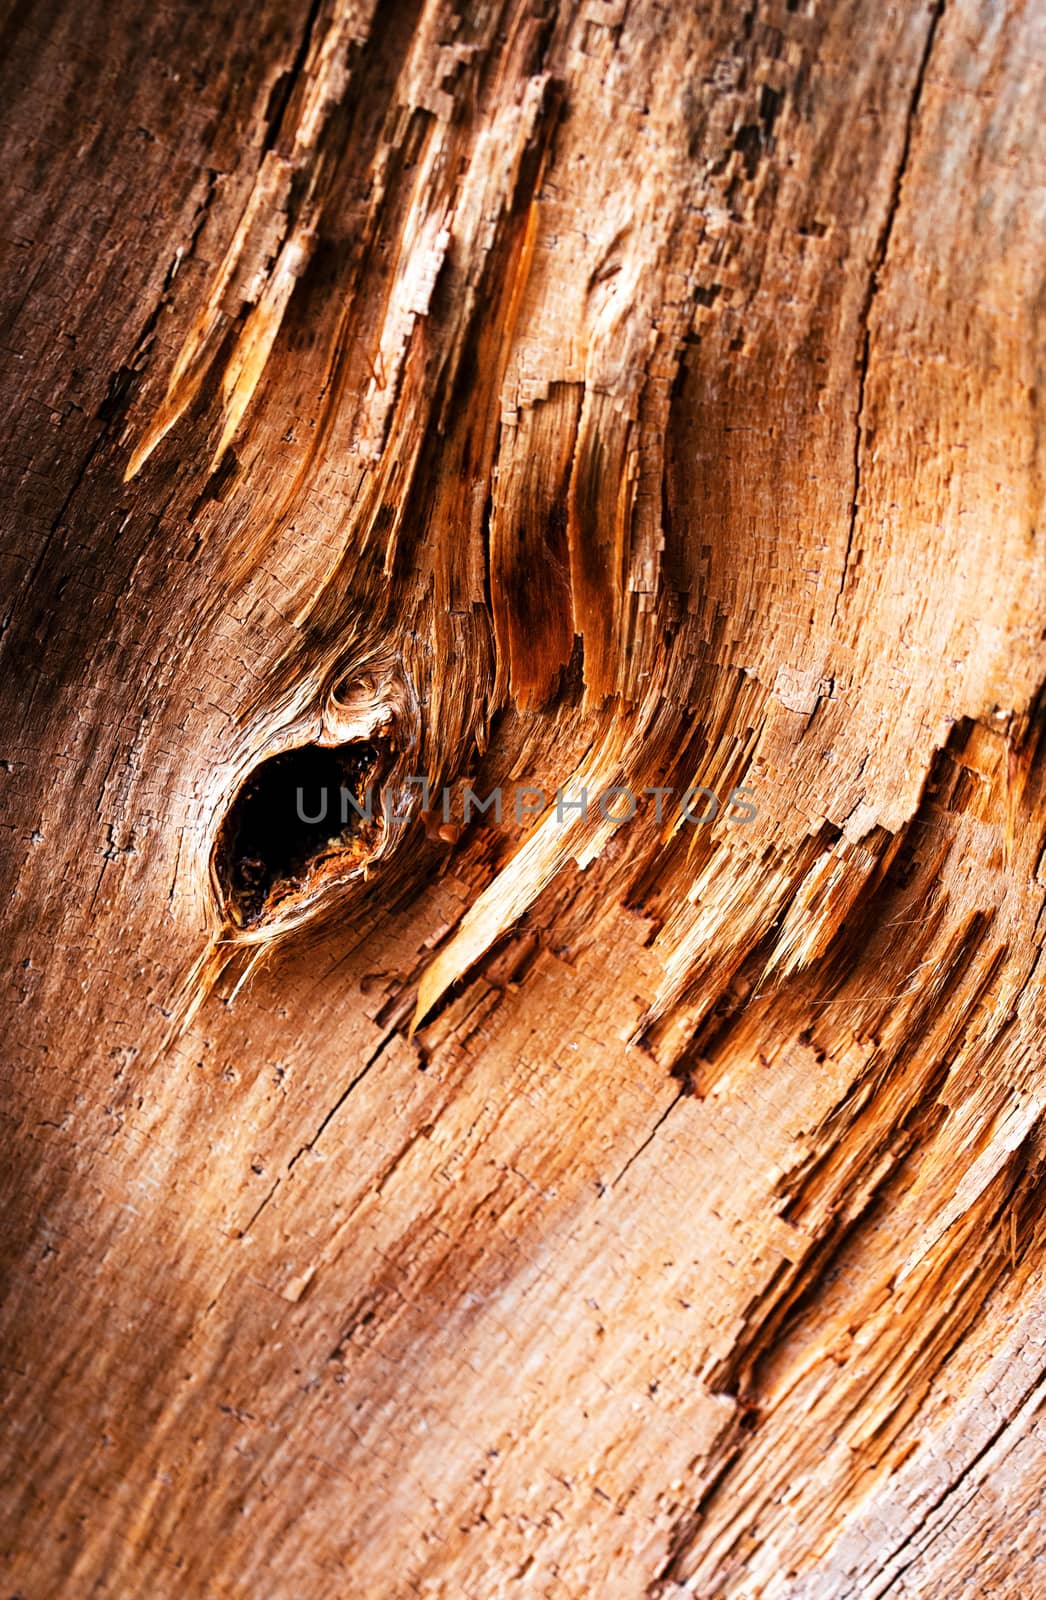 background or texture detail abstract split wood